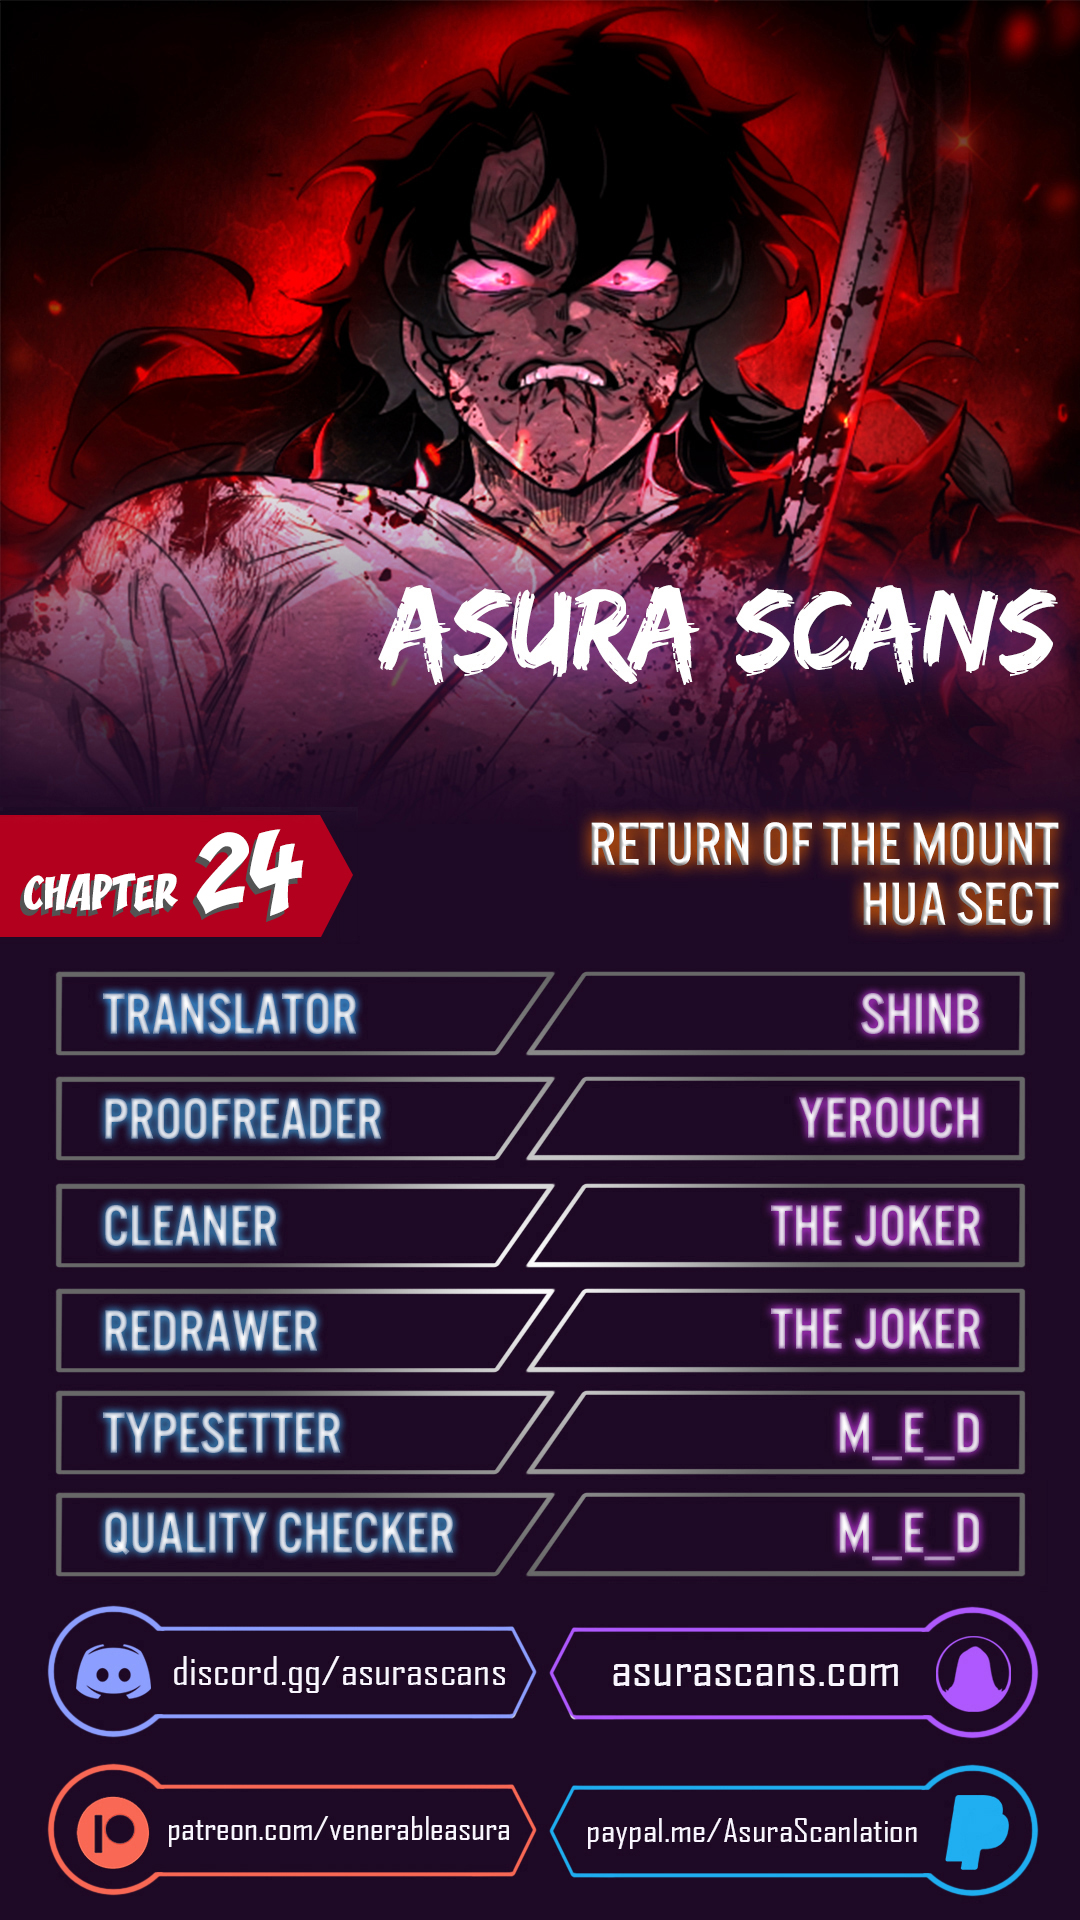 Return of the Mount Hua Sect - Chapter 11648 - Image 1